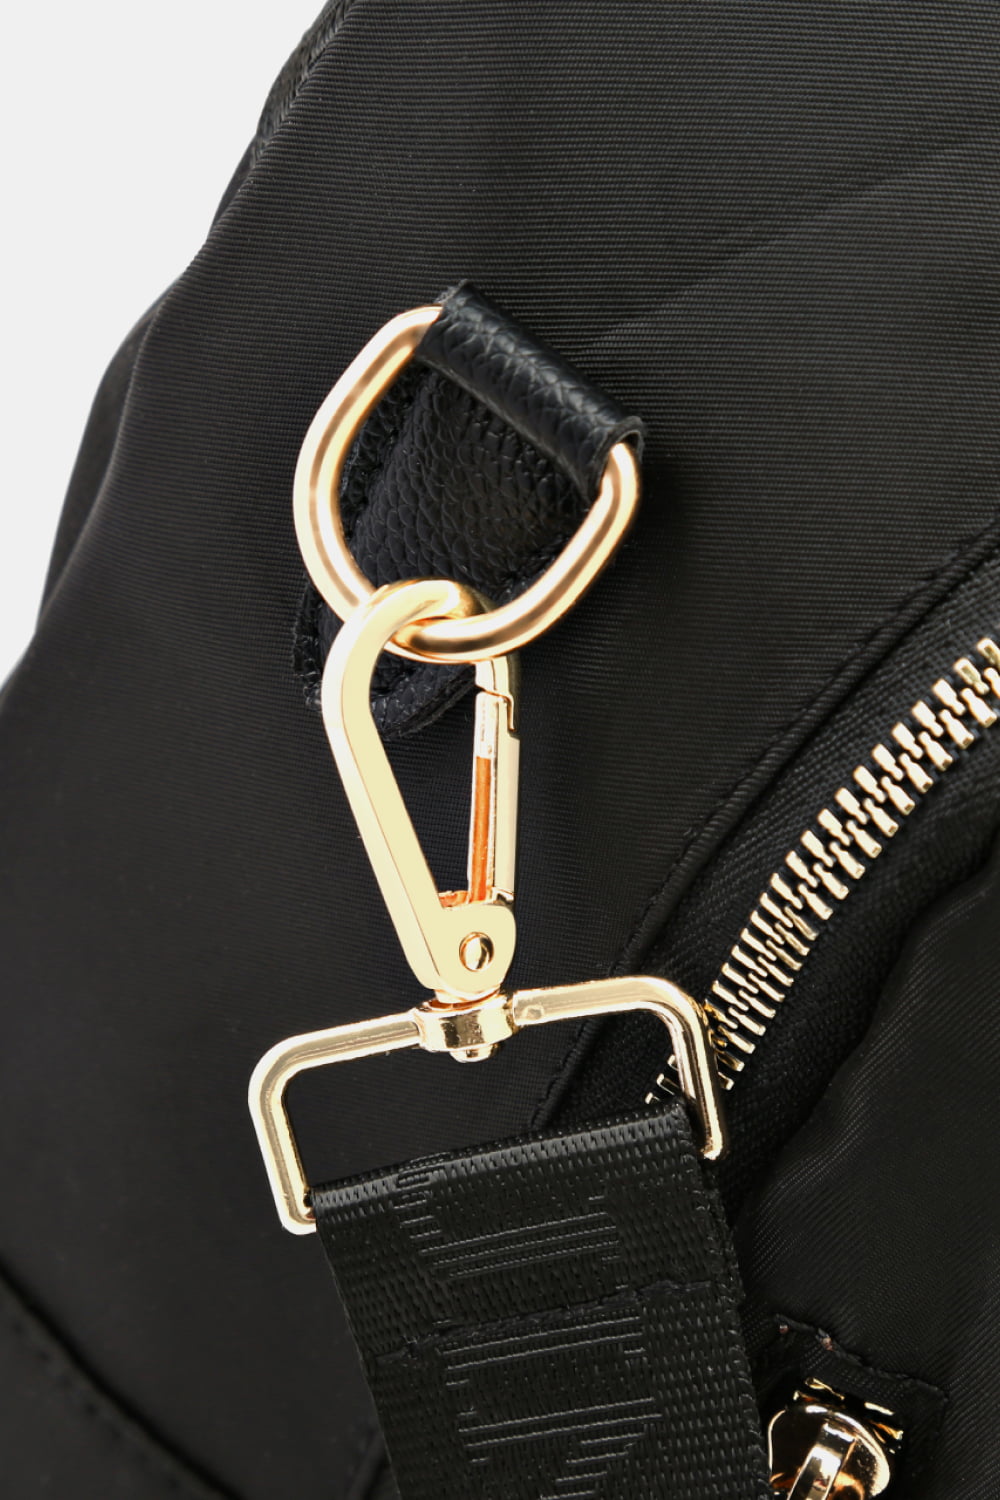 Medium Polyester Backpack With Gold Hardware